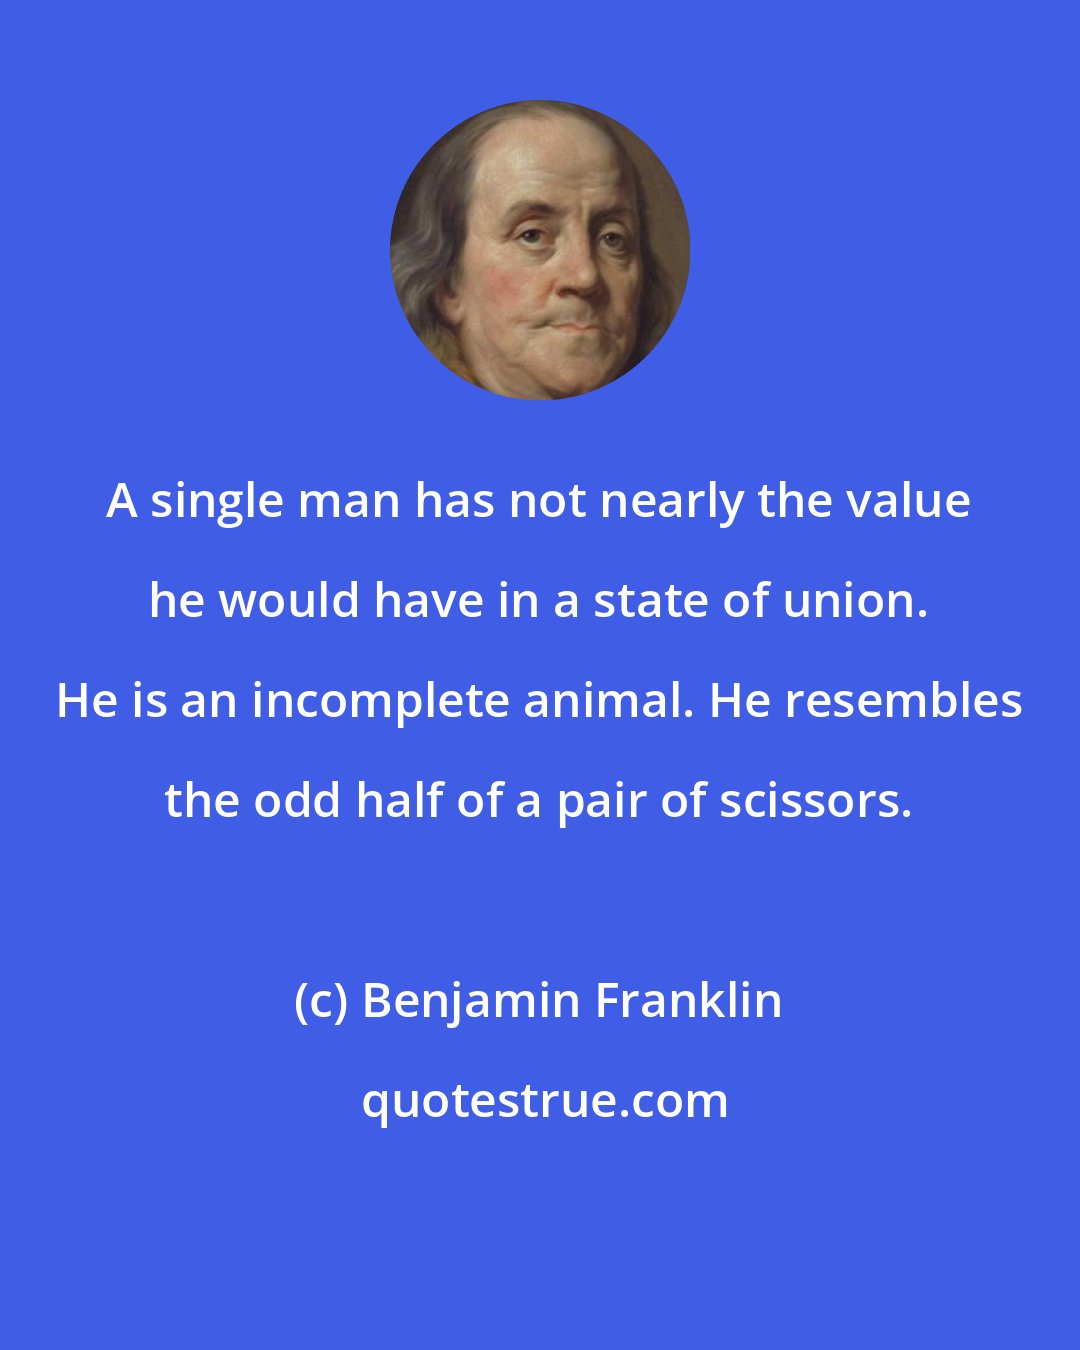 Benjamin Franklin: A single man has not nearly the value he would have in a state of union. He is an incomplete animal. He resembles the odd half of a pair of scissors.